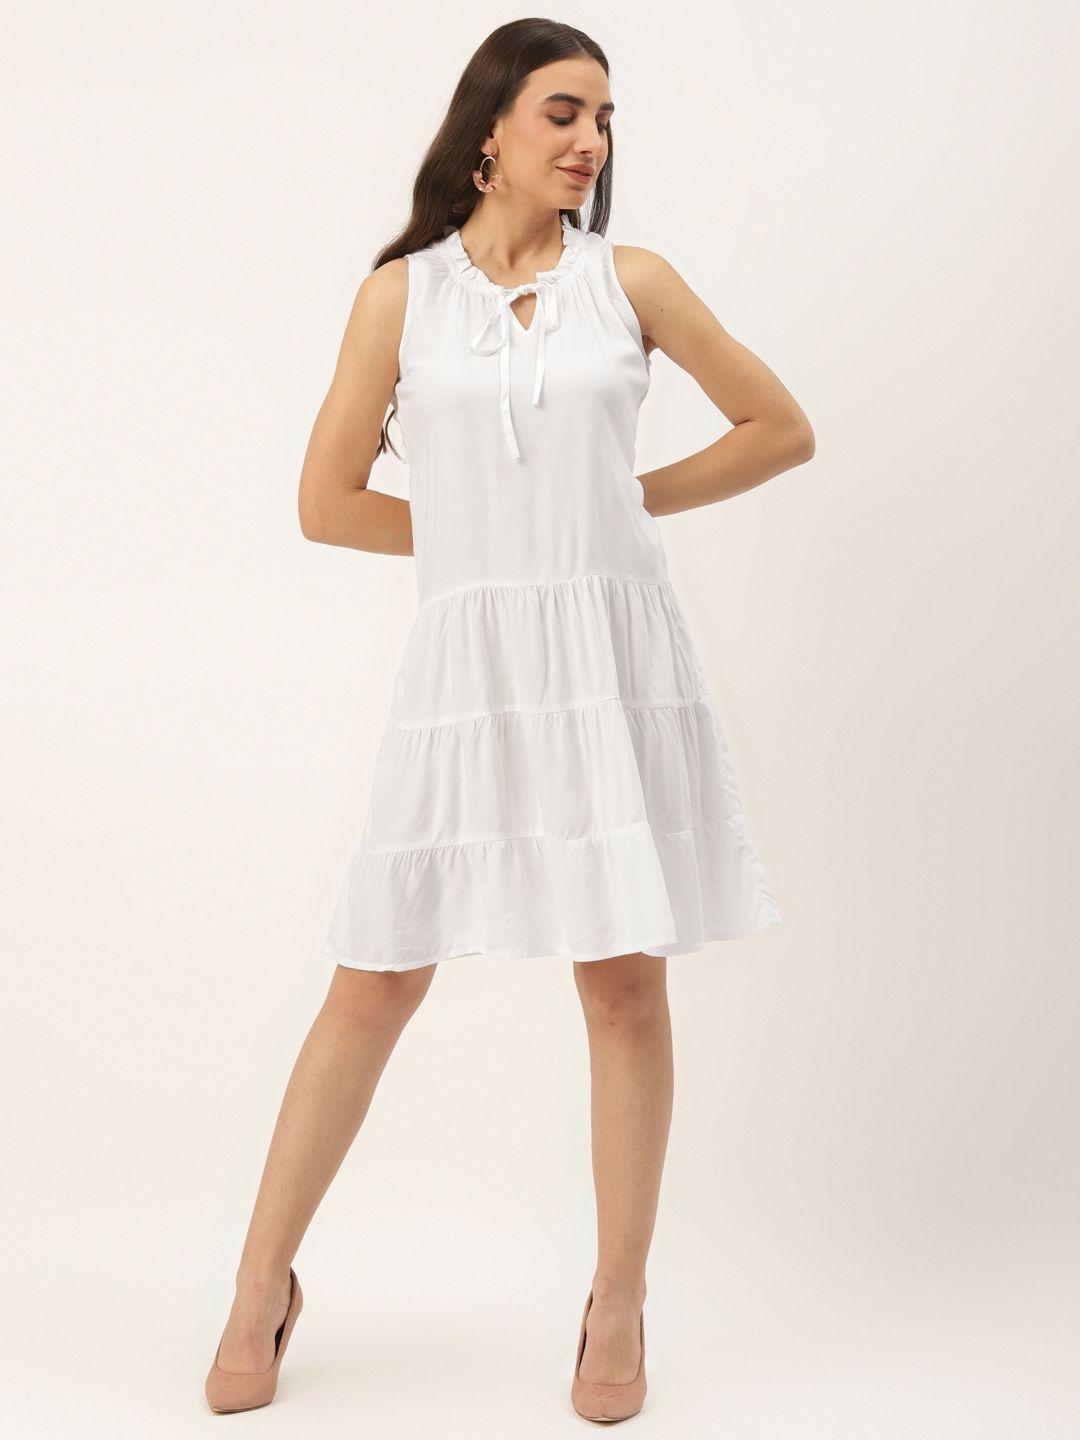 brinns white solid fit & flare dress with tie-ups